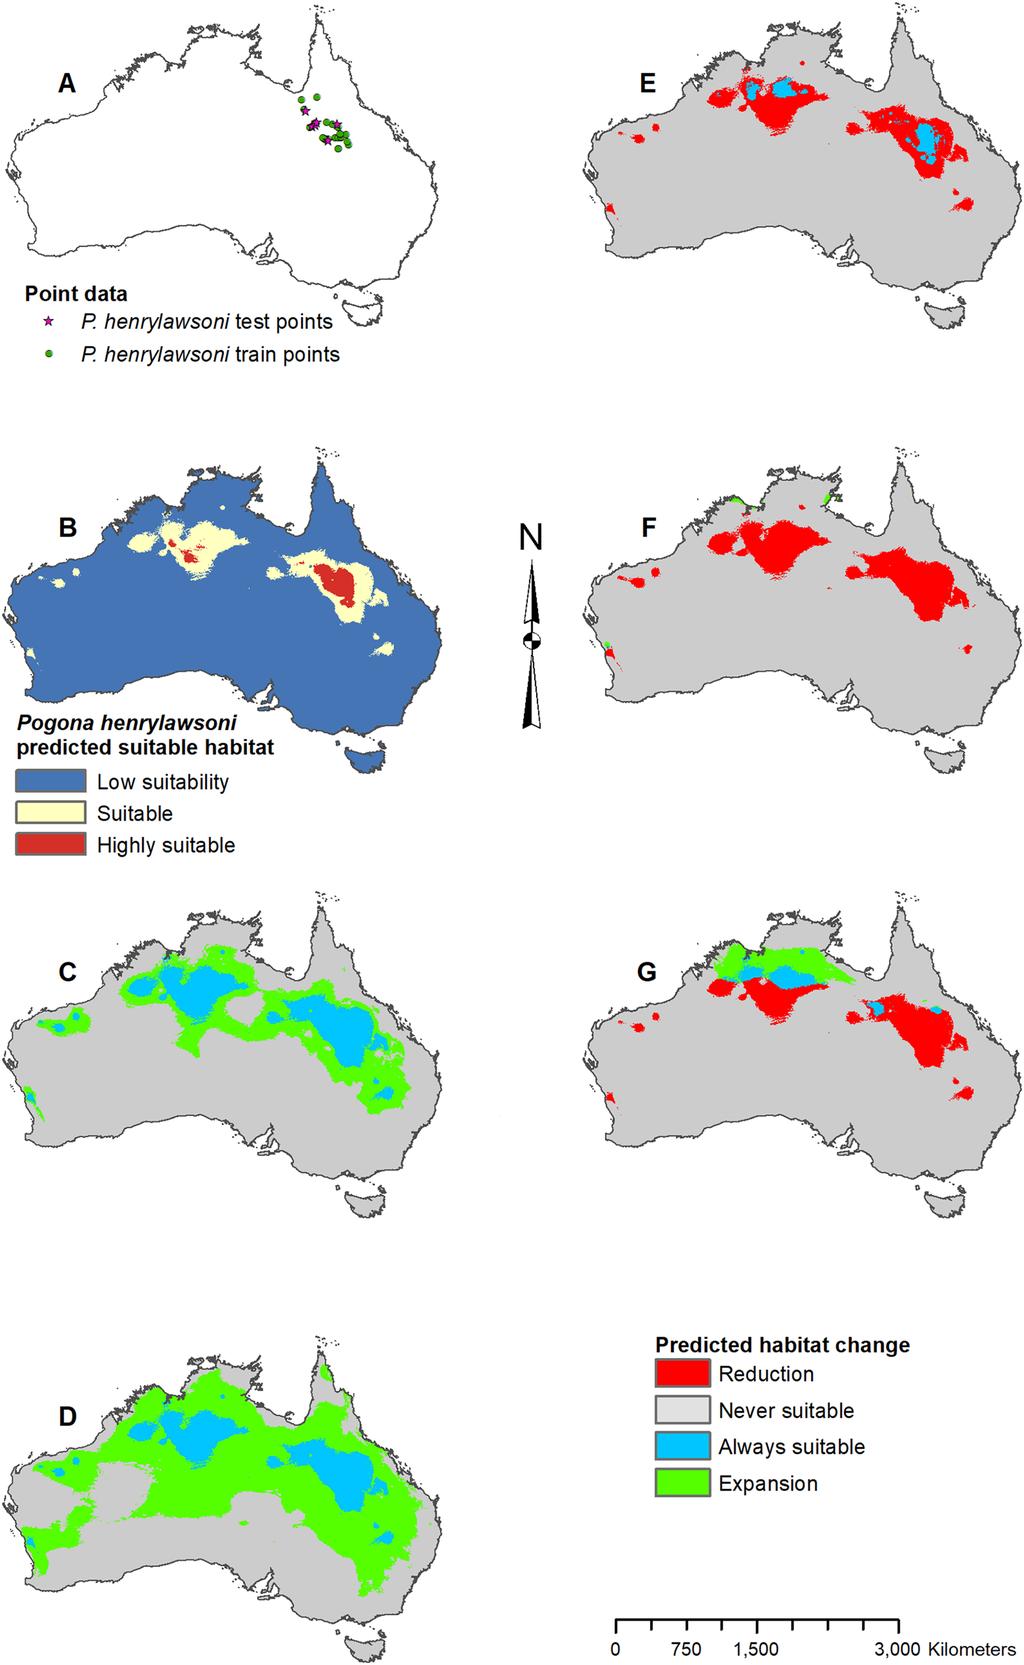 Figure 4 Result maps for Pogona henrylawsoni. (A) Test and train point distribution. (B) Current predicted areas of suitable habitat where highly suitable is >30.